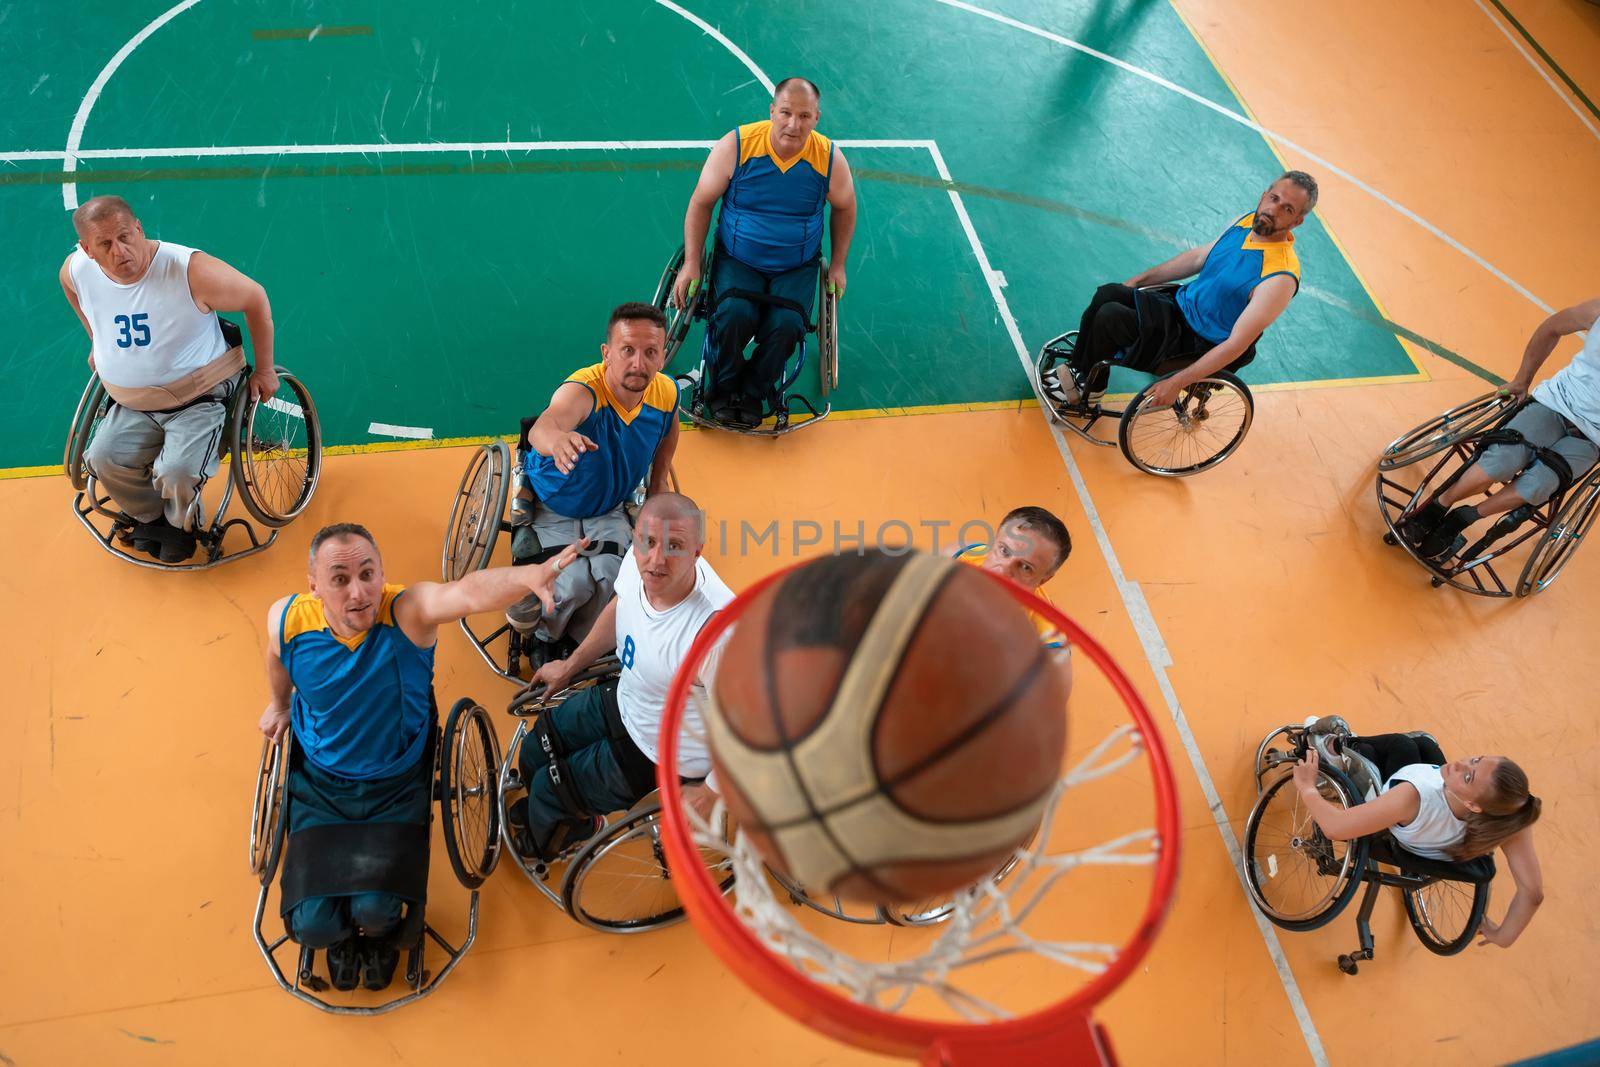 Disabled War or work veterans mixed race and age basketball teams in wheelchairs playing a training match in a sports gym hall. Handicapped people rehabilitation and inclusion concept.  by dotshock